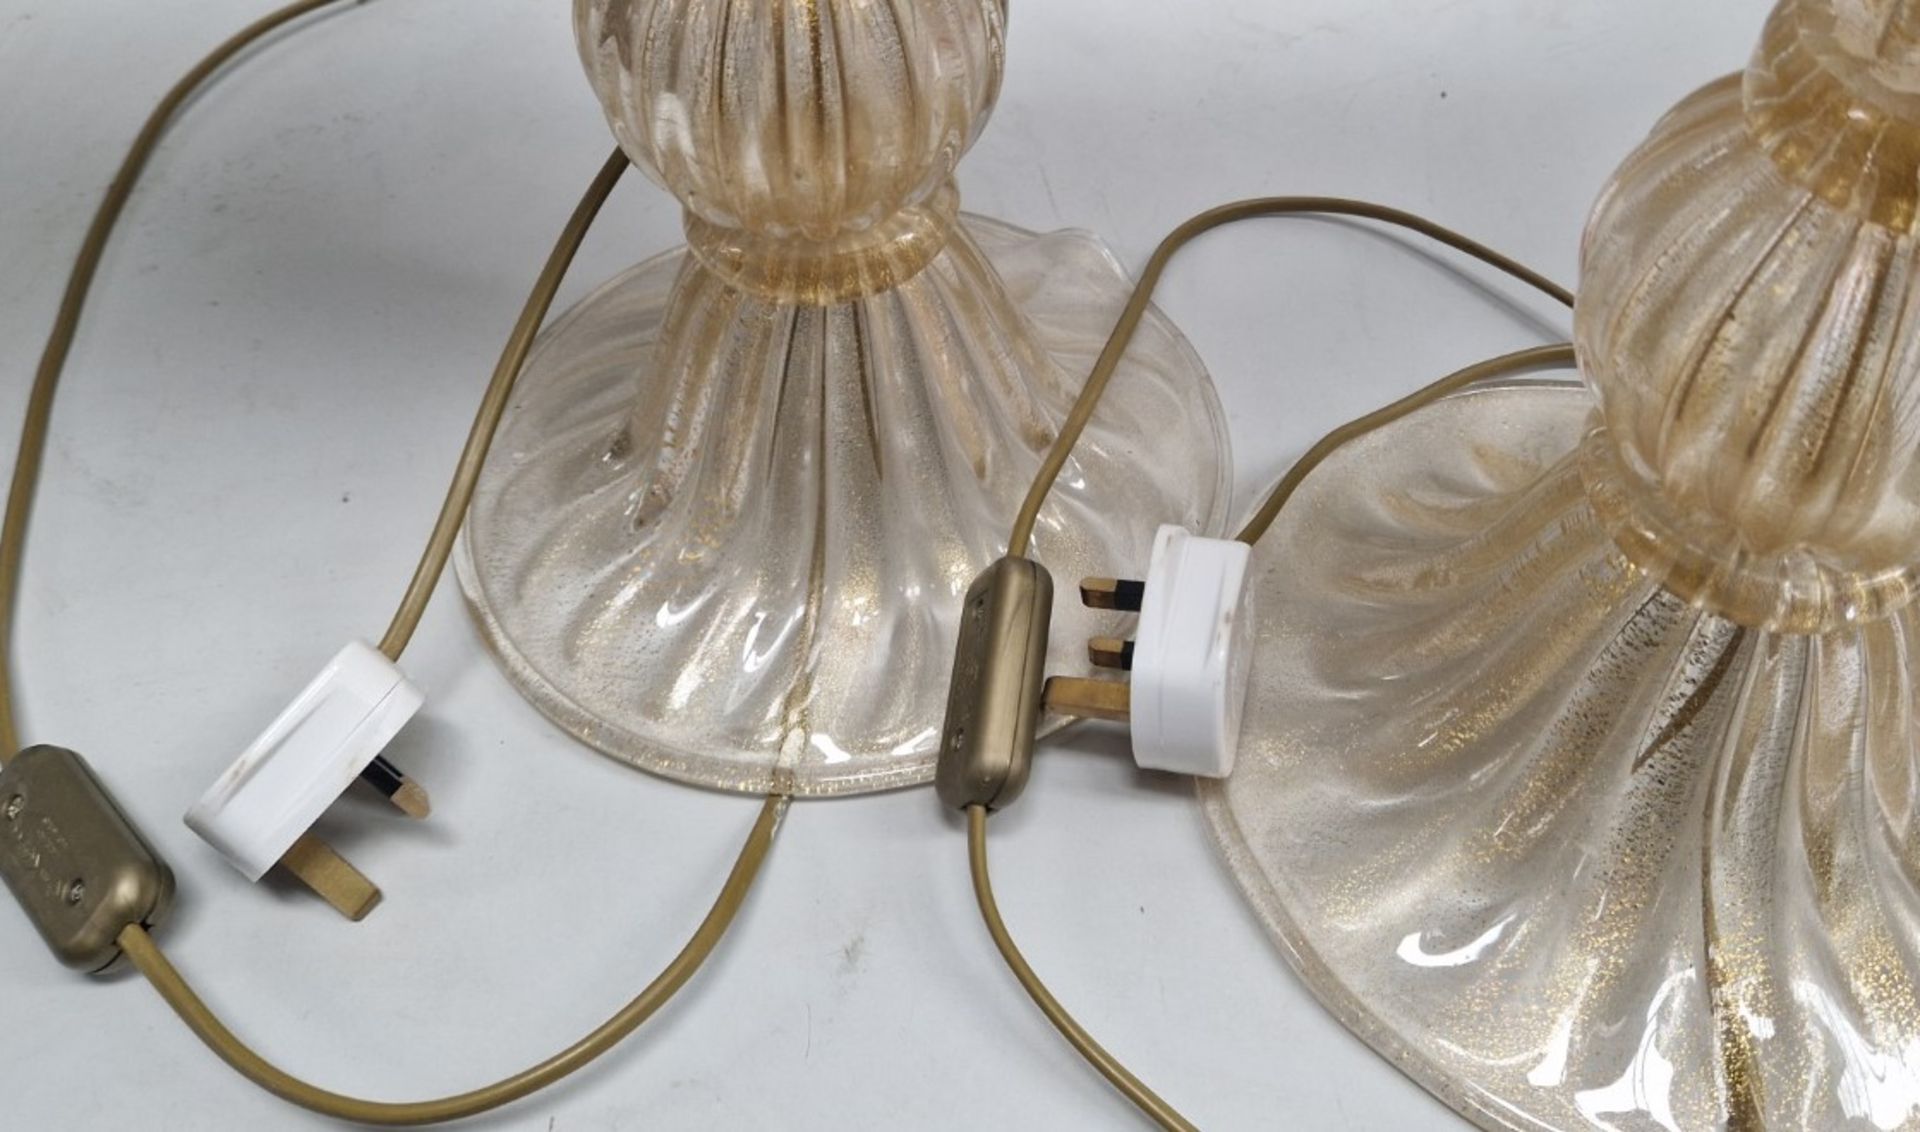 Set Of 2 x Mid-Century Classic Blown Murano Glass Table Lamp With Gold Flecks & Metallic Shades - Image 11 of 11